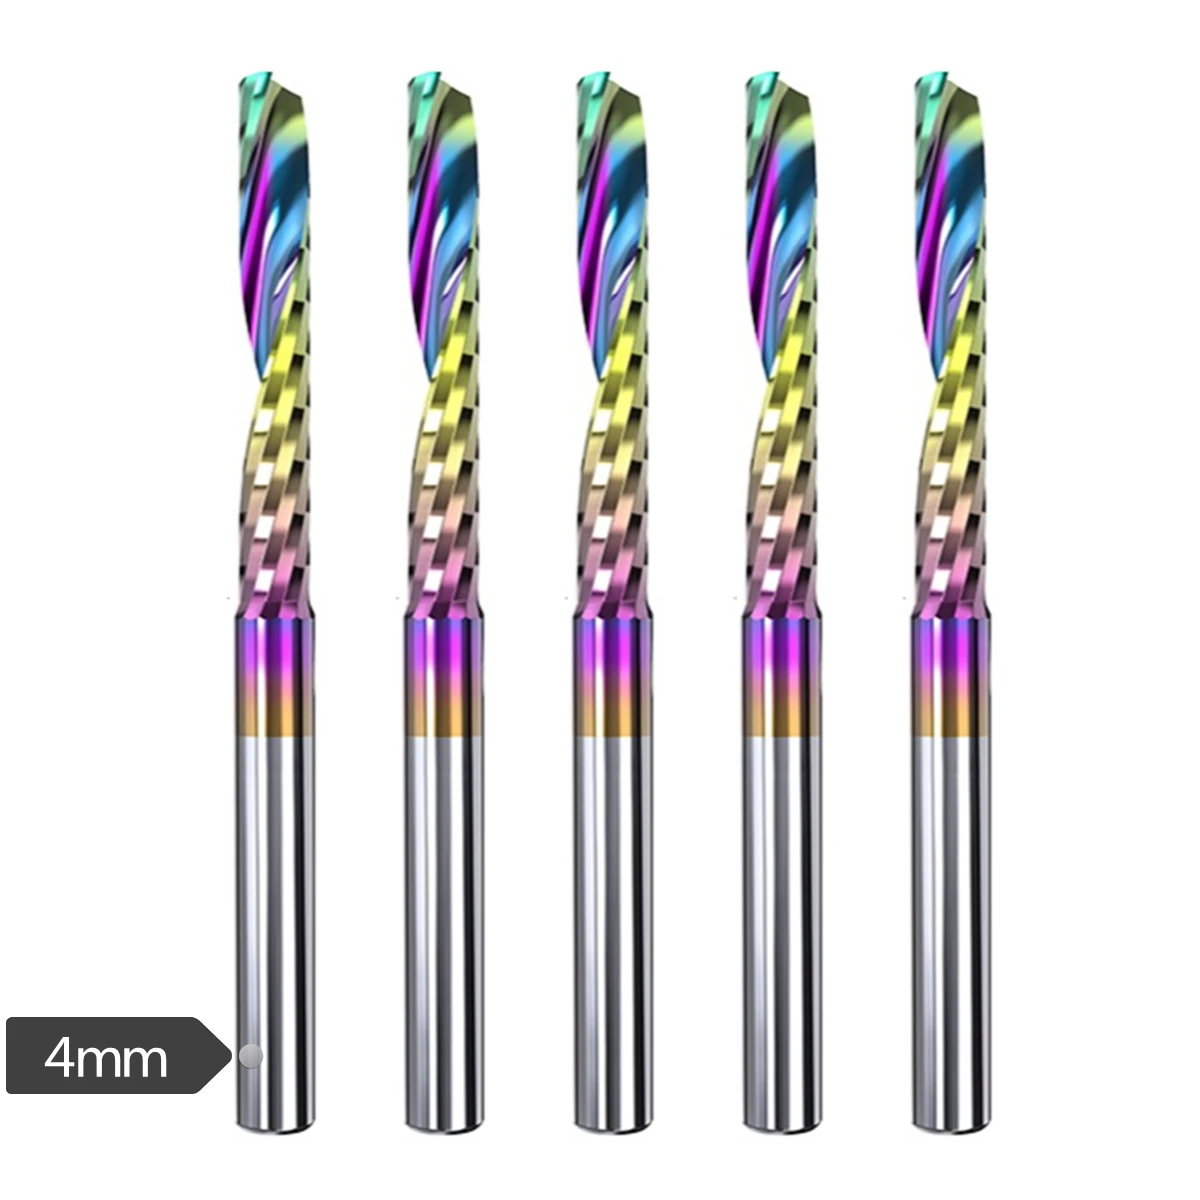 

5pcs 4mm Shank Single Flute CNC Coated Router Bit Tungsten Carbide Spiral End Mills Milling Cutter For Wood/PS/PP/PA/PVC Etc.